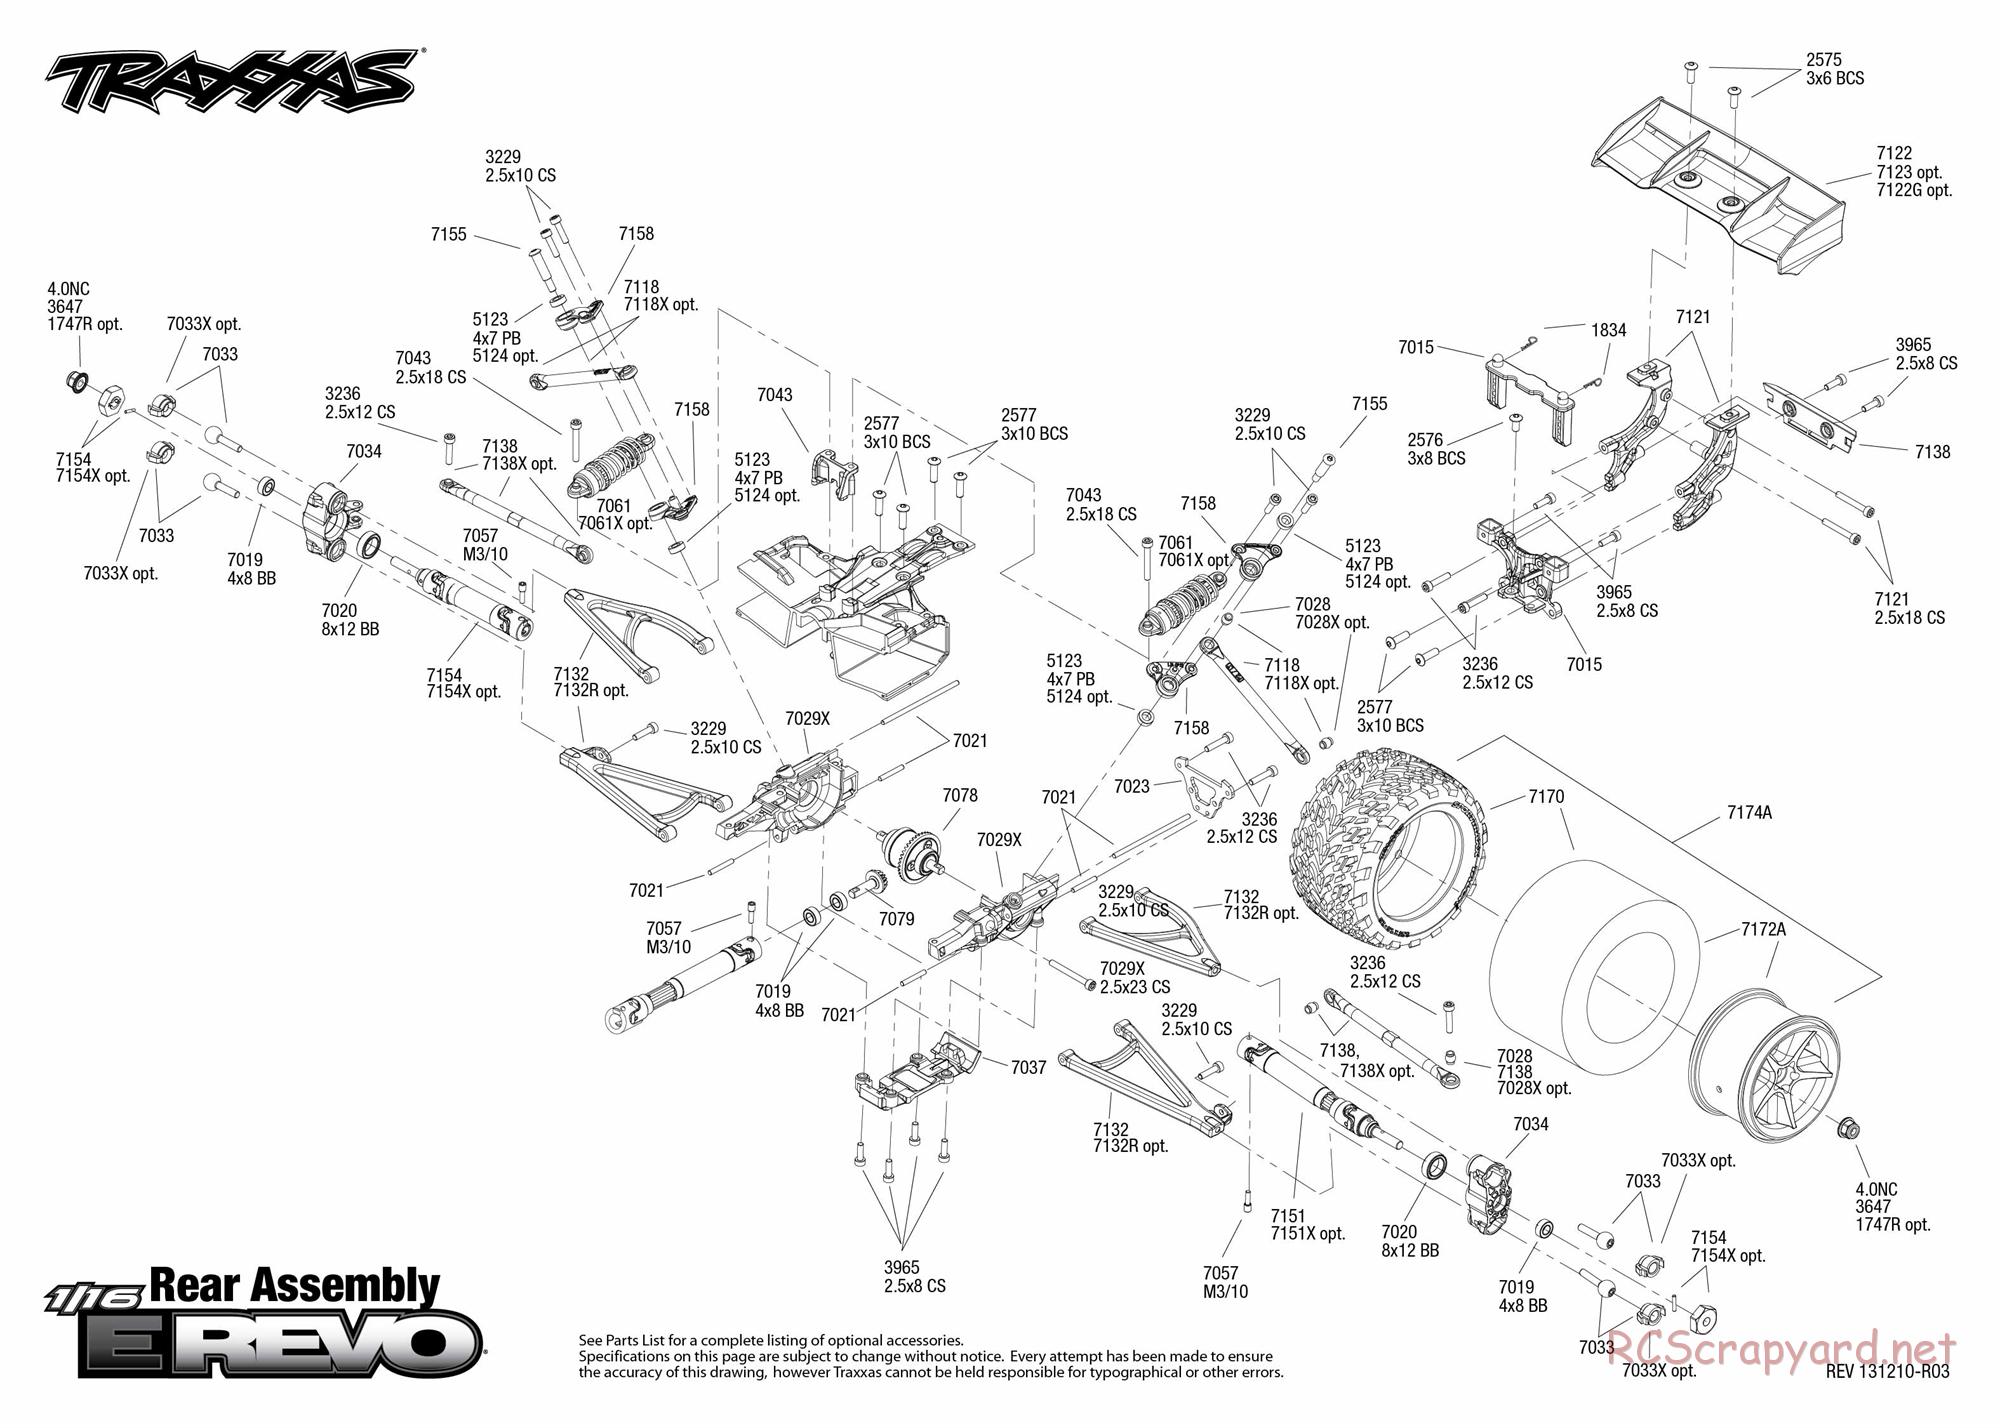 Traxxas - 1/16 E-Revo Brushed (2013) - Exploded Views - Page 4